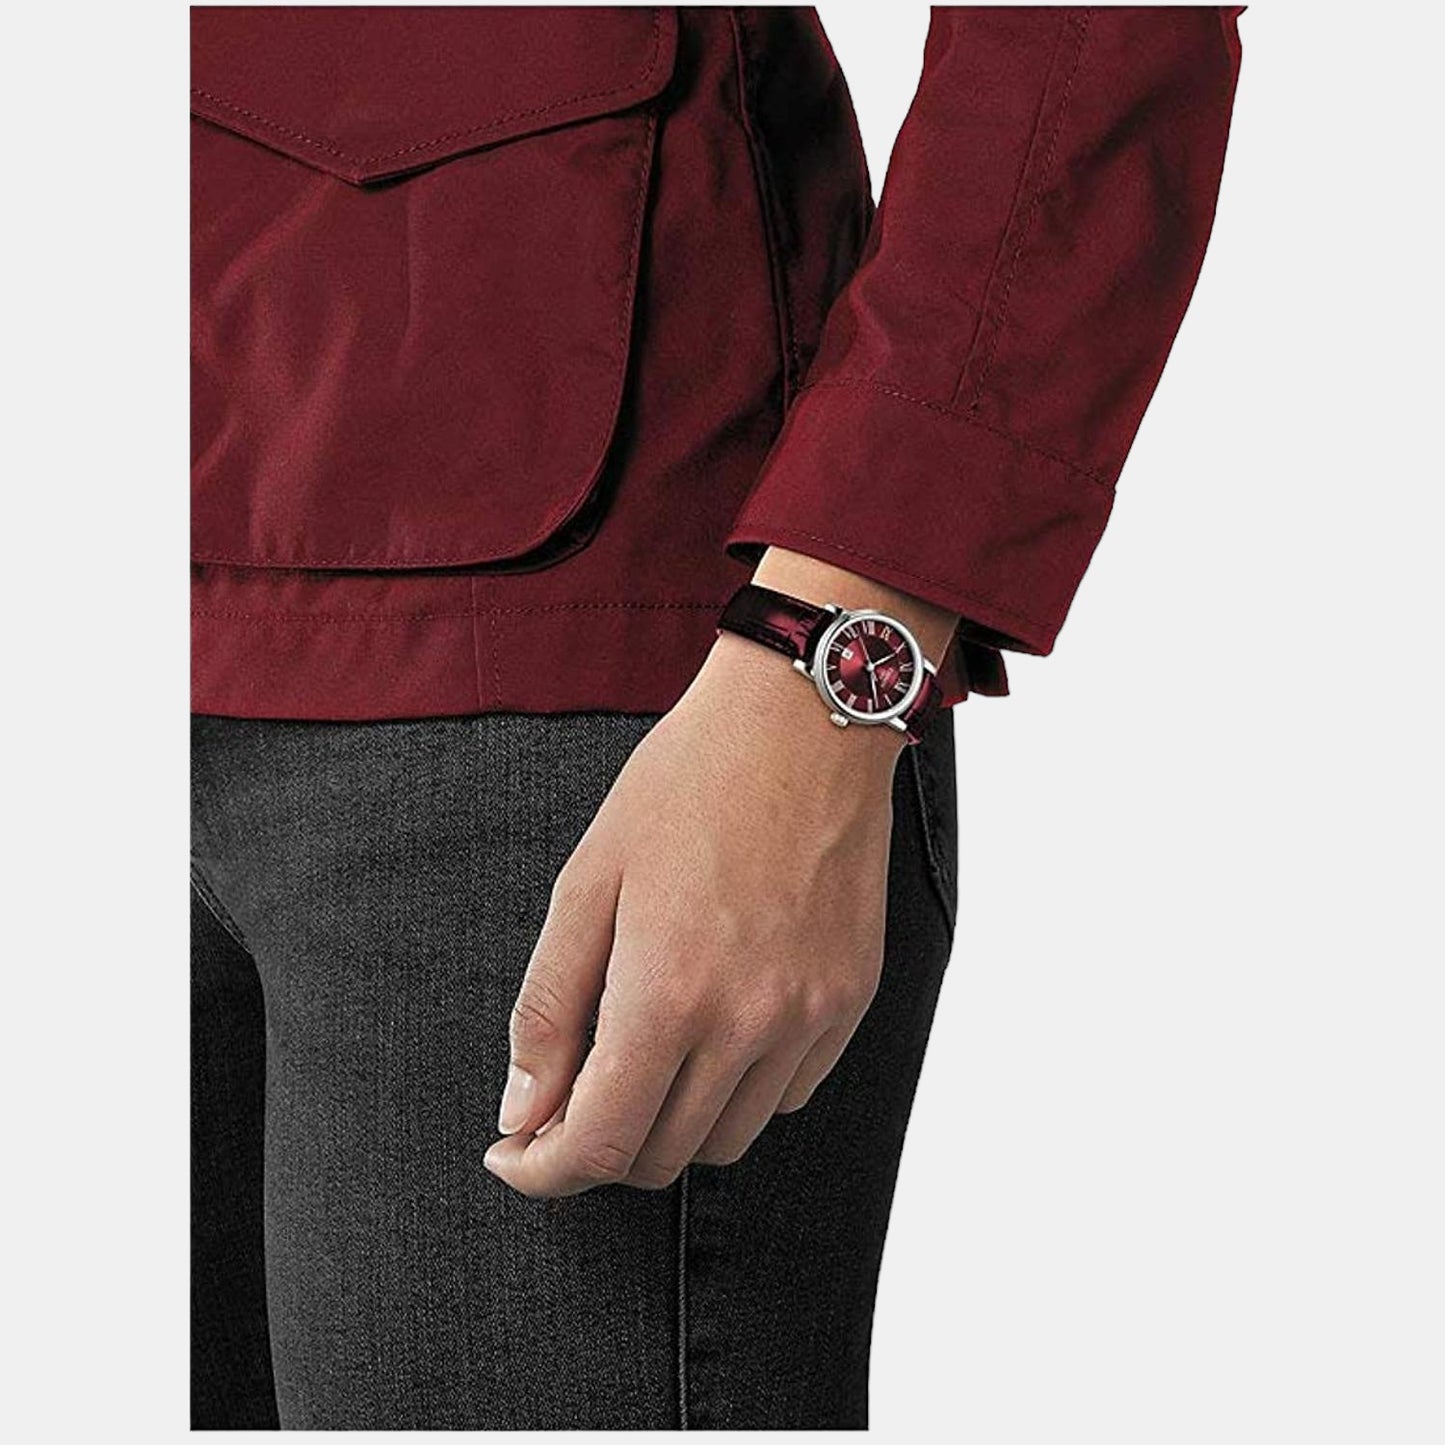 tissot-stainless-steel-maroon-analog-male-watch-t1222101637300